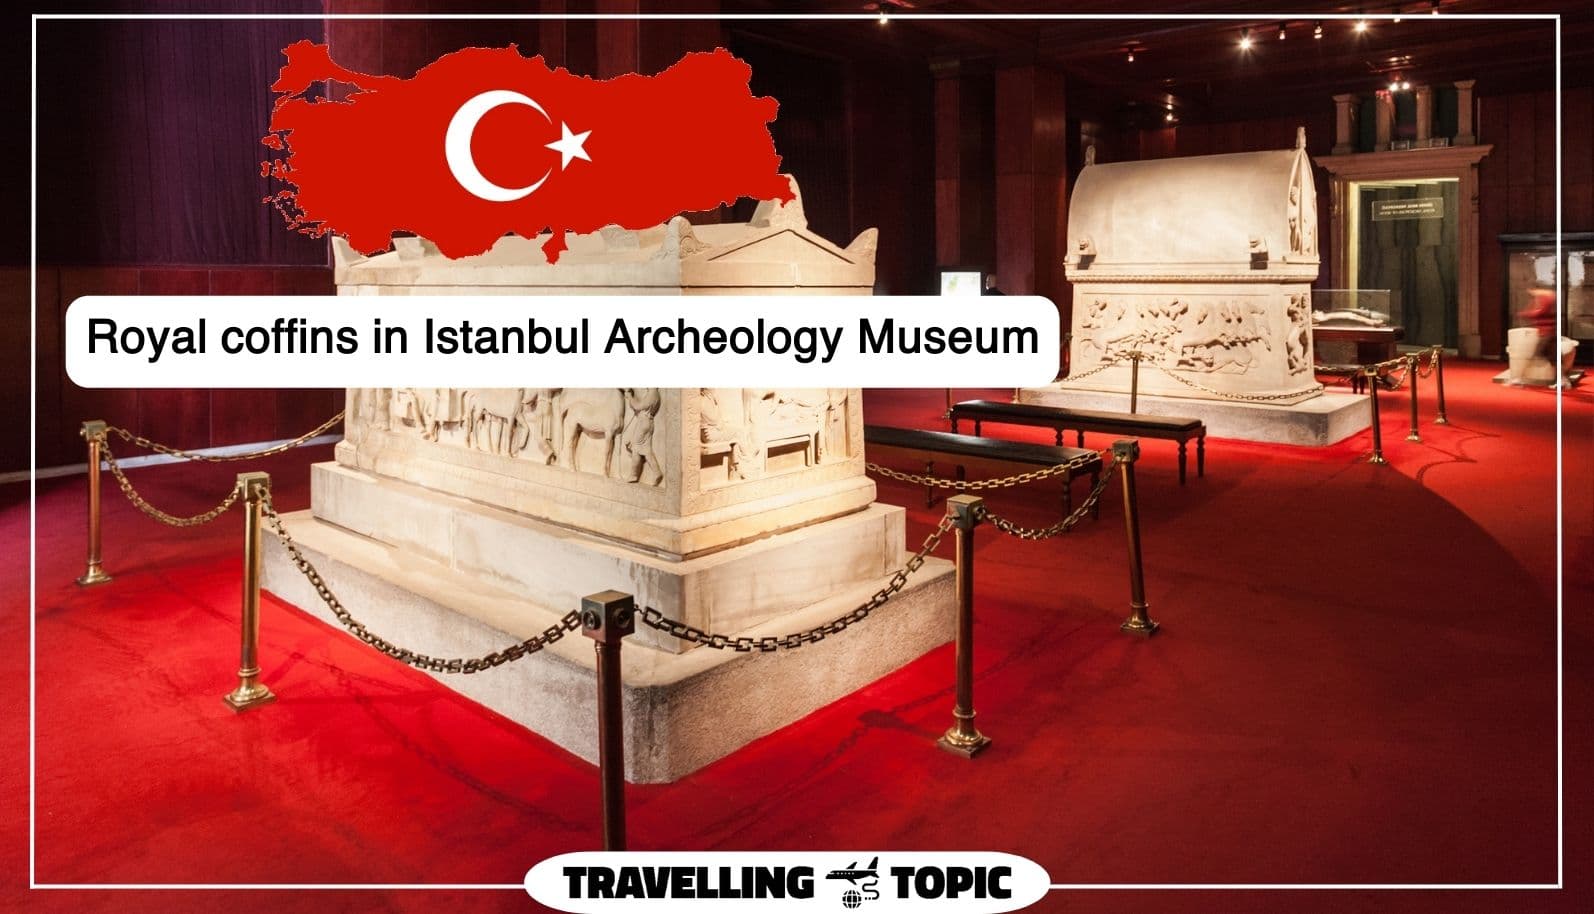 Royal coffins in Istanbul Archeology Museum